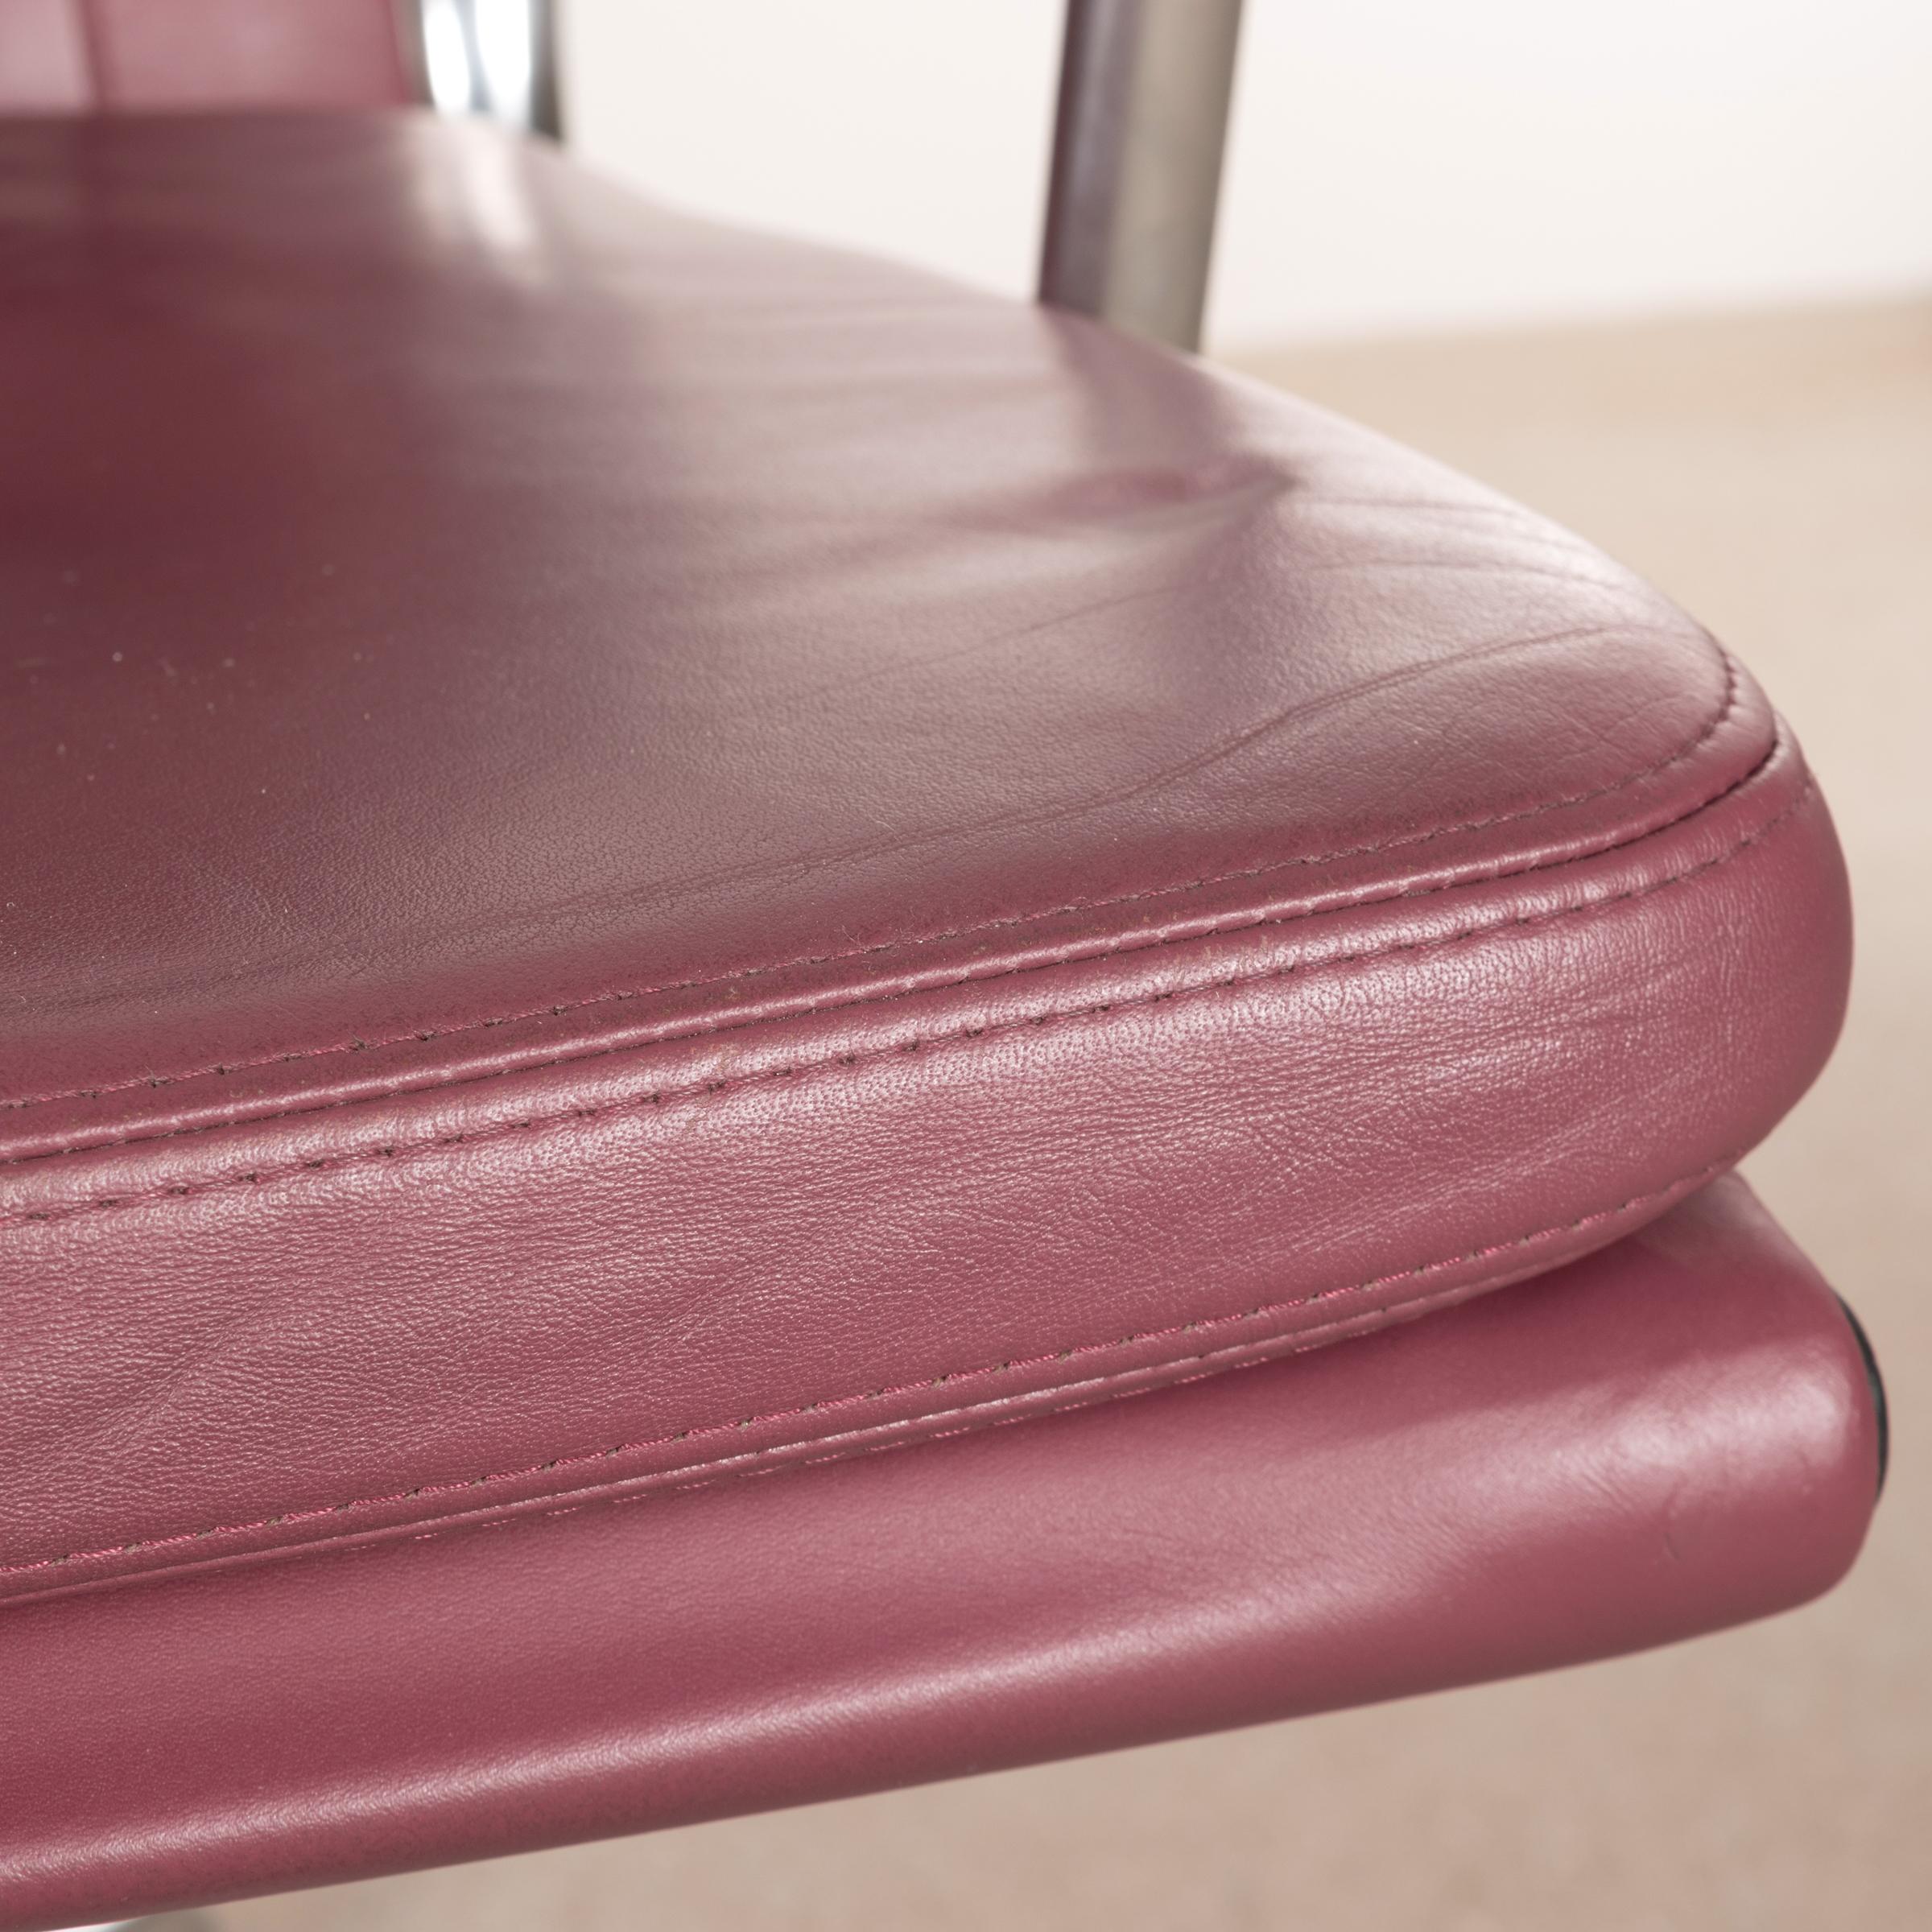 Aluminum Charles & Ray Eames EA208 Soft Pad Chair in Aubergine / Purple leather by Vitra